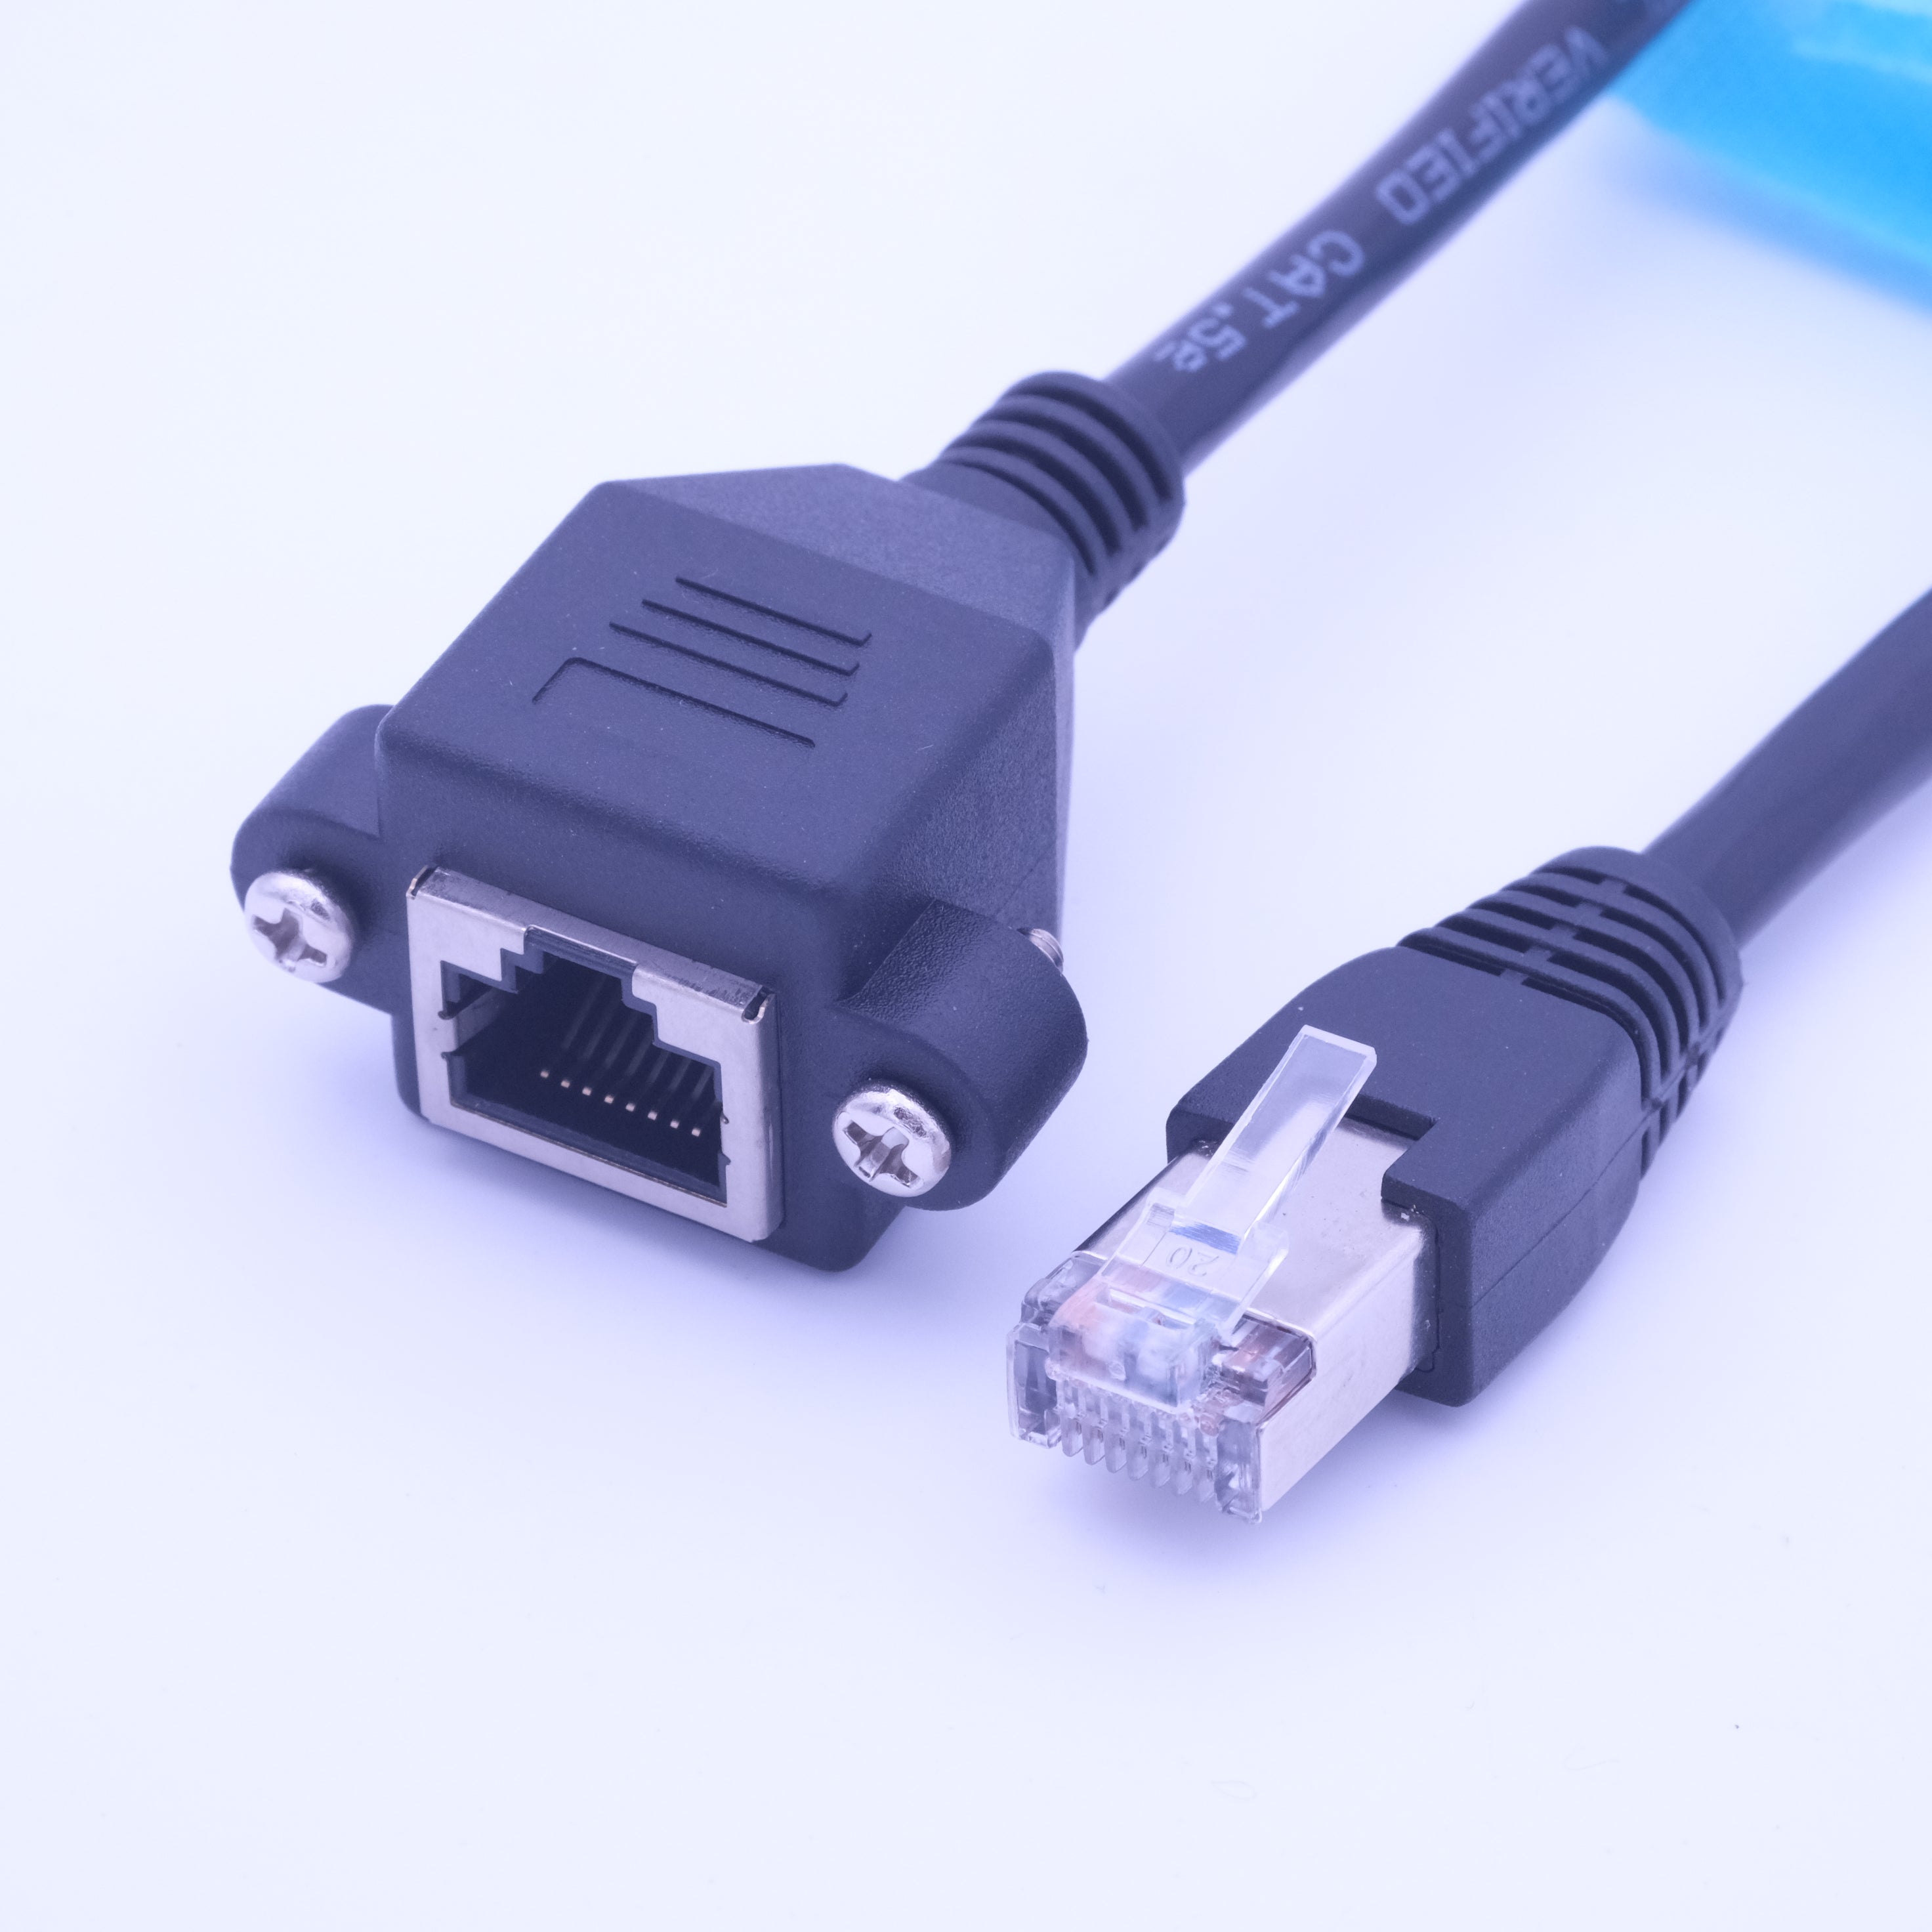 RJ45 Male to Female Panel Mount Ethernet Extension Cable Cat 5E/5 Cat 6